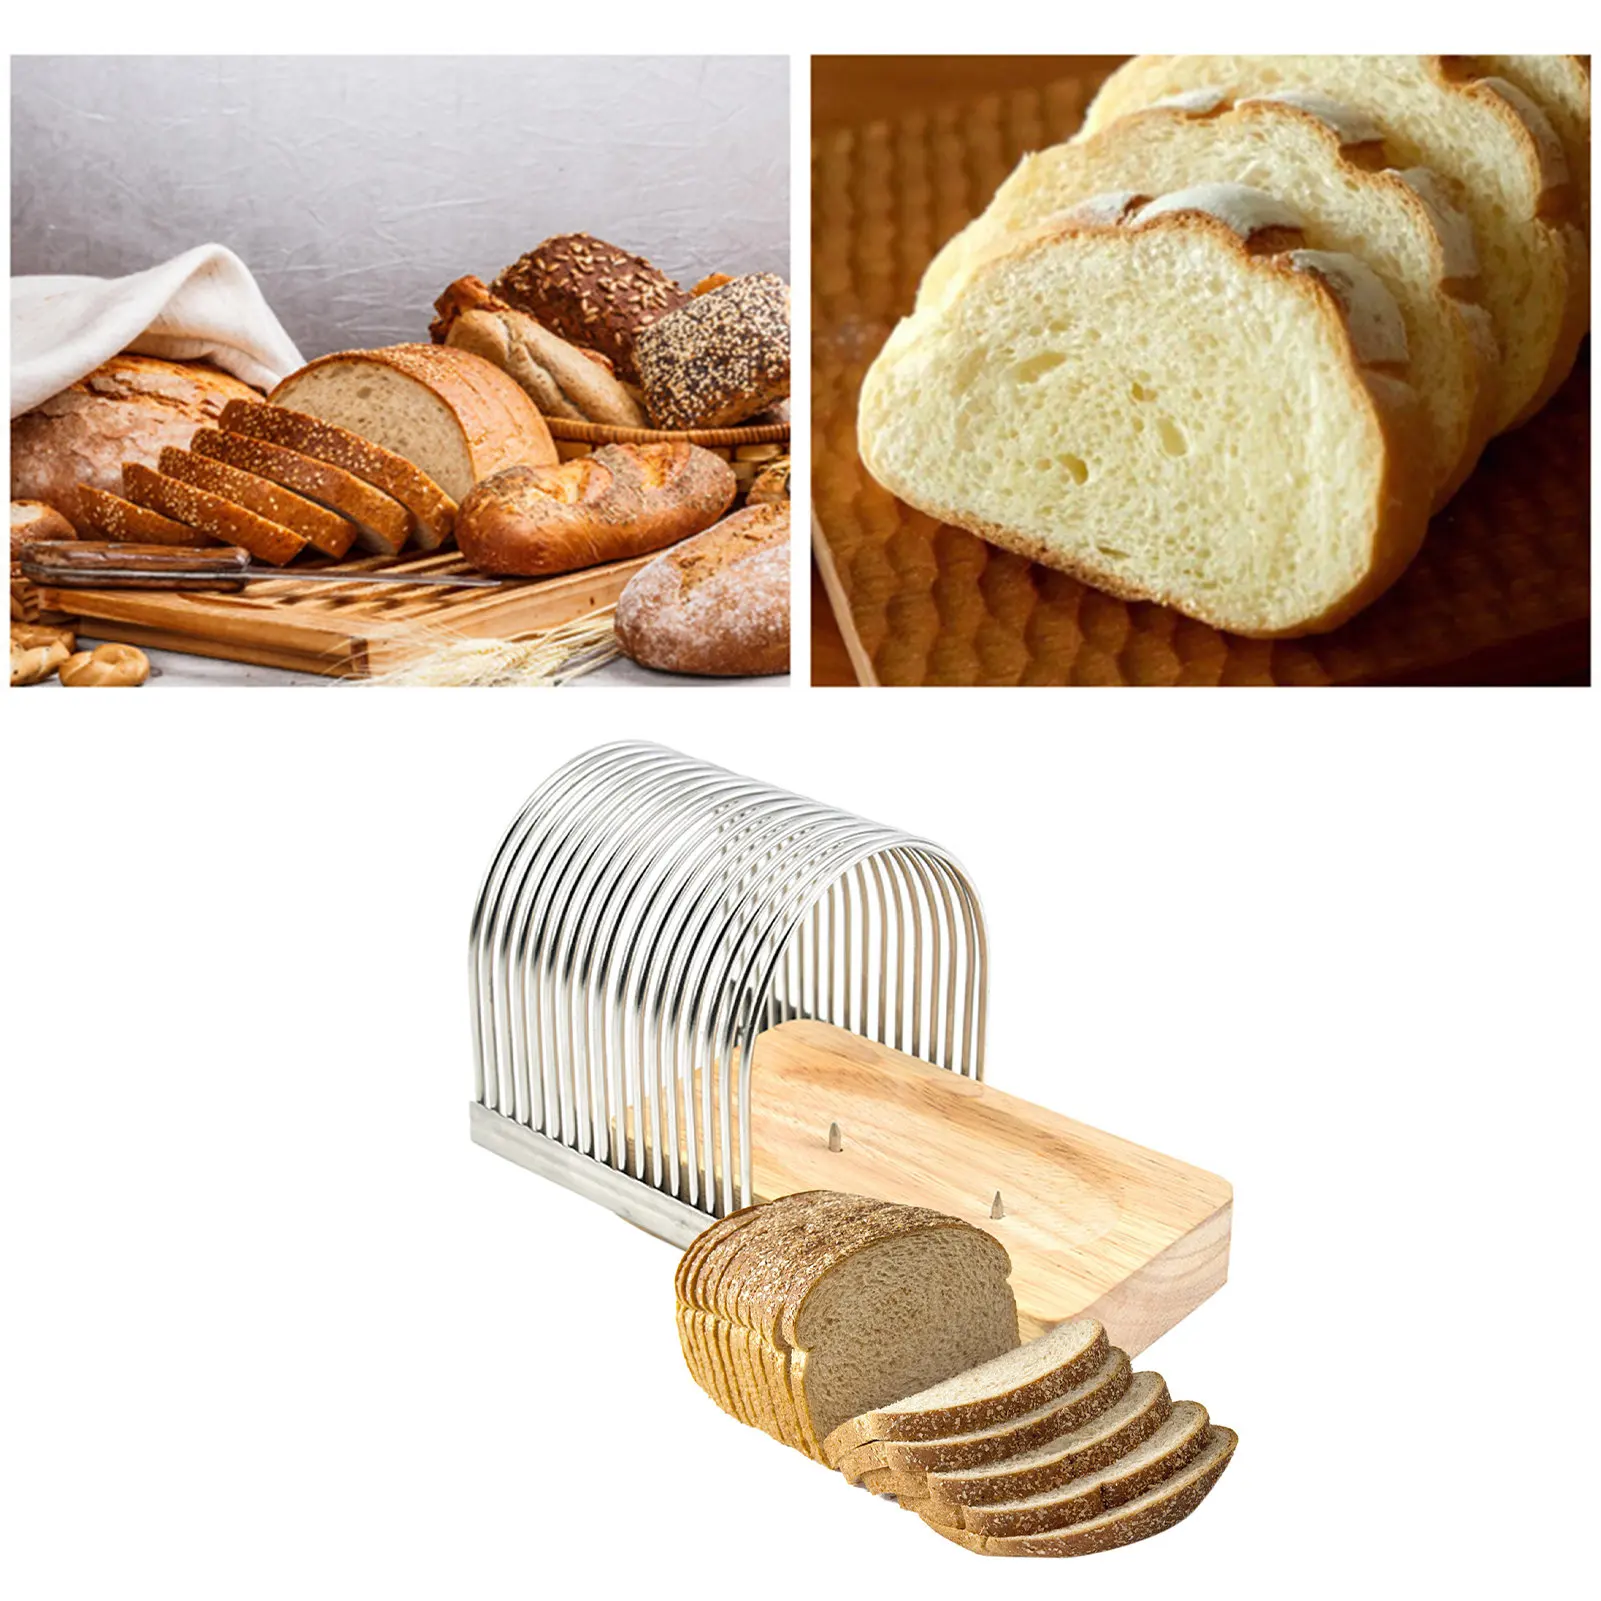 https://ae01.alicdn.com/kf/S49656bfe57d745a480783de9a0abf7d5V/Detachable-Bread-Cutter-Slicer-Toast-Cutting-Guide-Mold-Stainless-Steel-Manual-Bread-Loaf-Slicer-For-Slicing.jpg